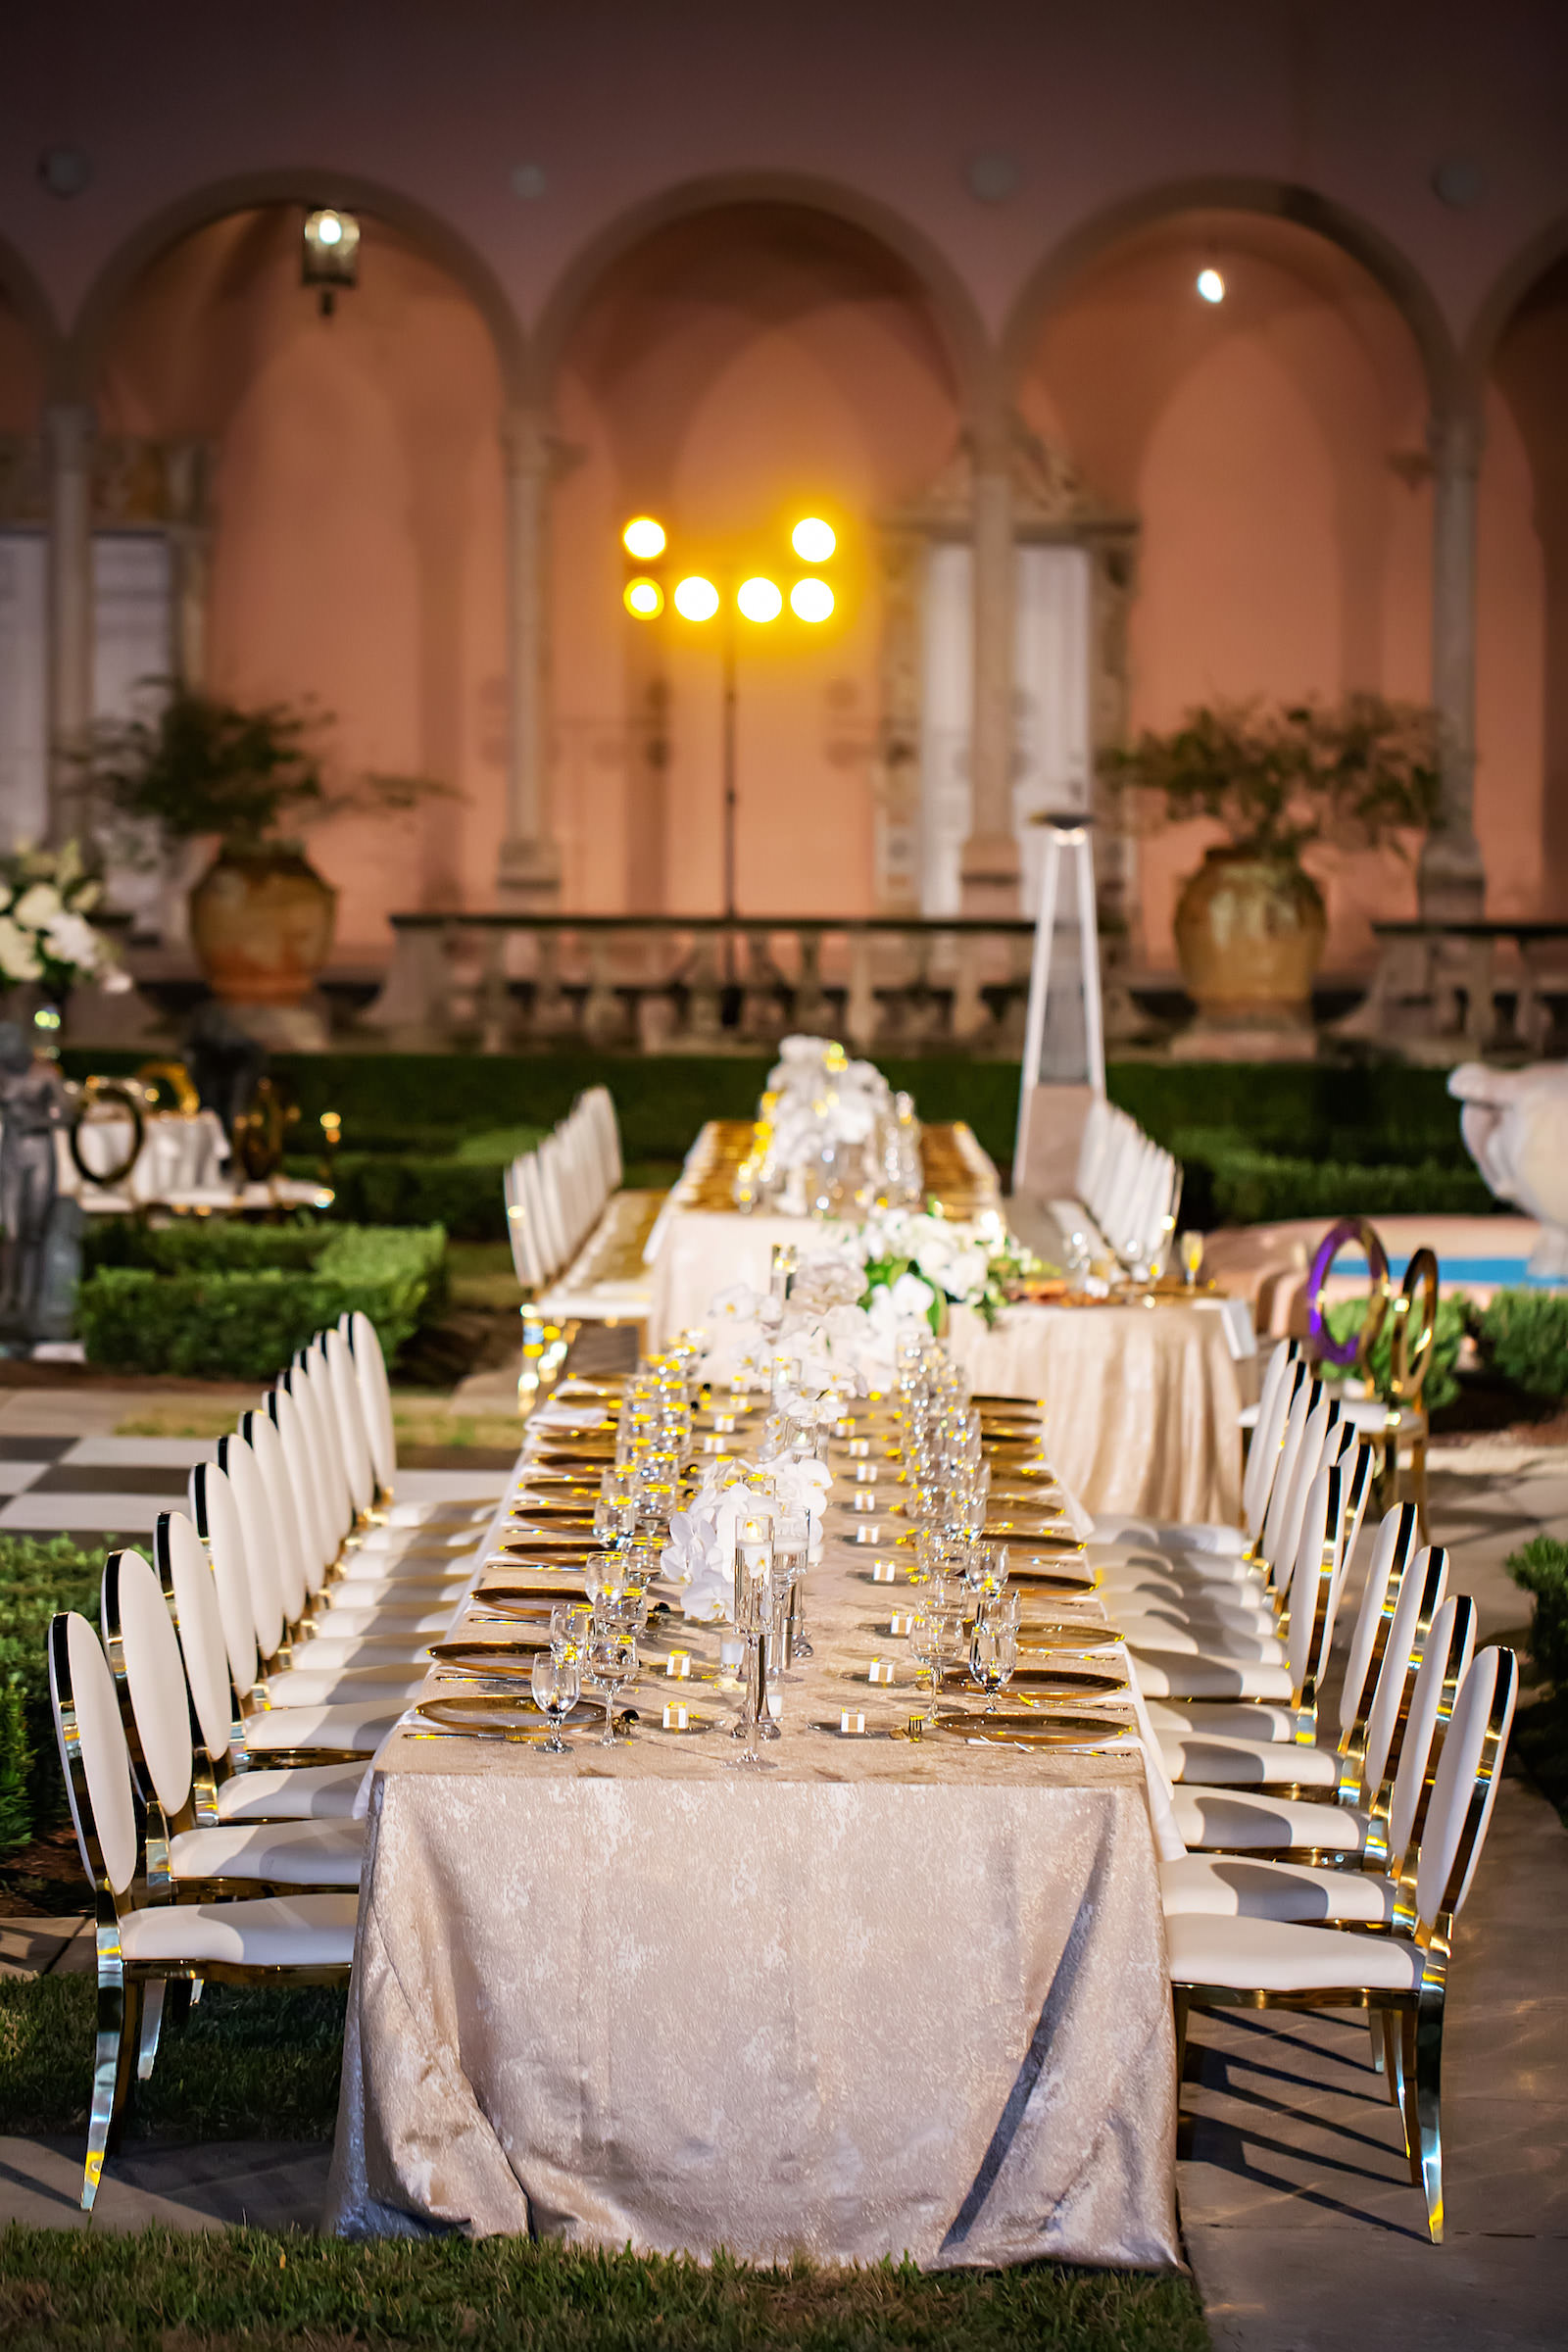 Luxurious Modern Chic Wedding Reception Decor Wedding Party Head Table, Champagne Table Linen, White and Gold Chairs, Purple Uplighting, White and Greenery Floral Centerpieces | Tampa Bay Wedding Photographer Limelight Photography | Sarasota Wedding Venue Ringling Museum